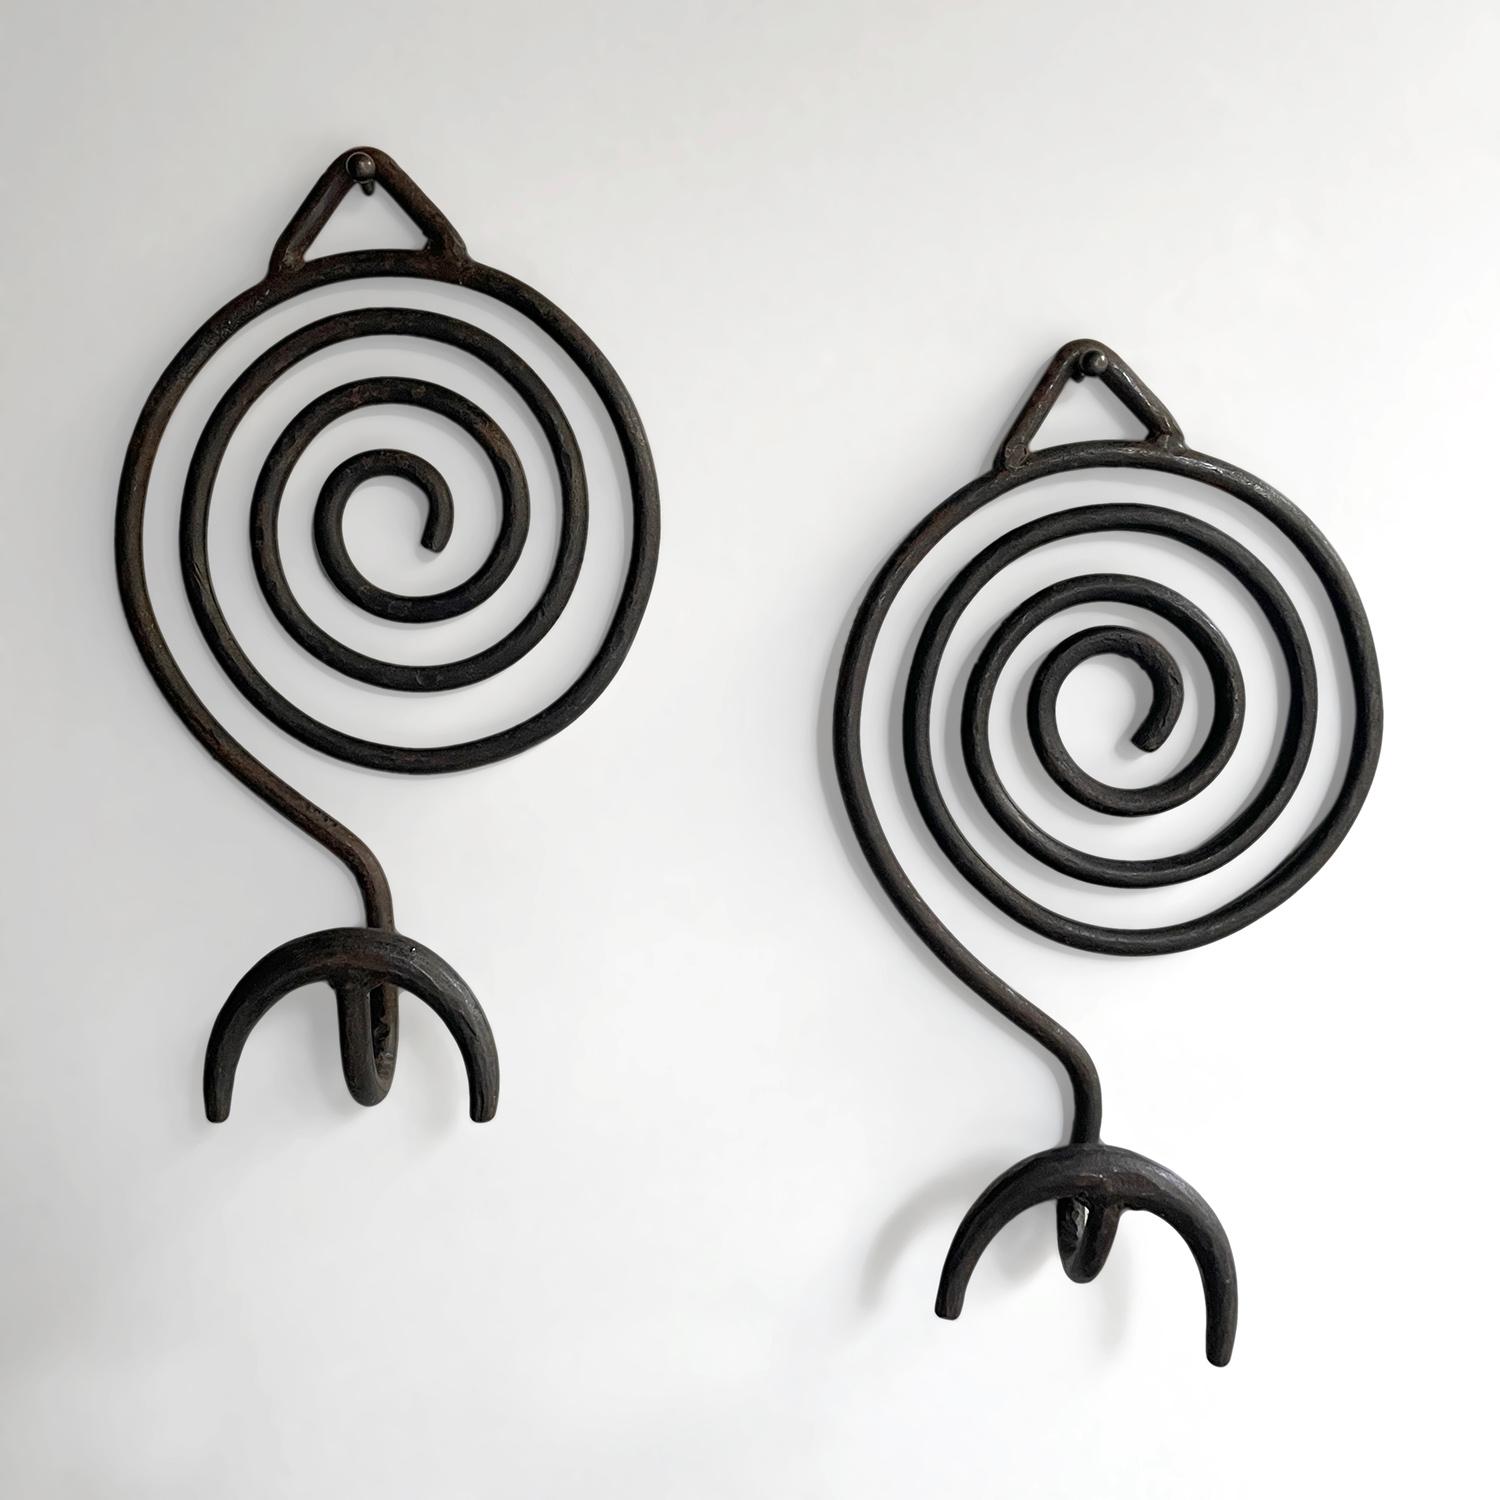 Pair of Italian sculpted Iron wall coat hooks 
Italy, circa 1960s 
These beautifully sculpted wall hooks are a dramatic statement piece
Whimsical spiraled back piece supports an arched lower hook
Both wall hooks have a single mounting loop 
Each